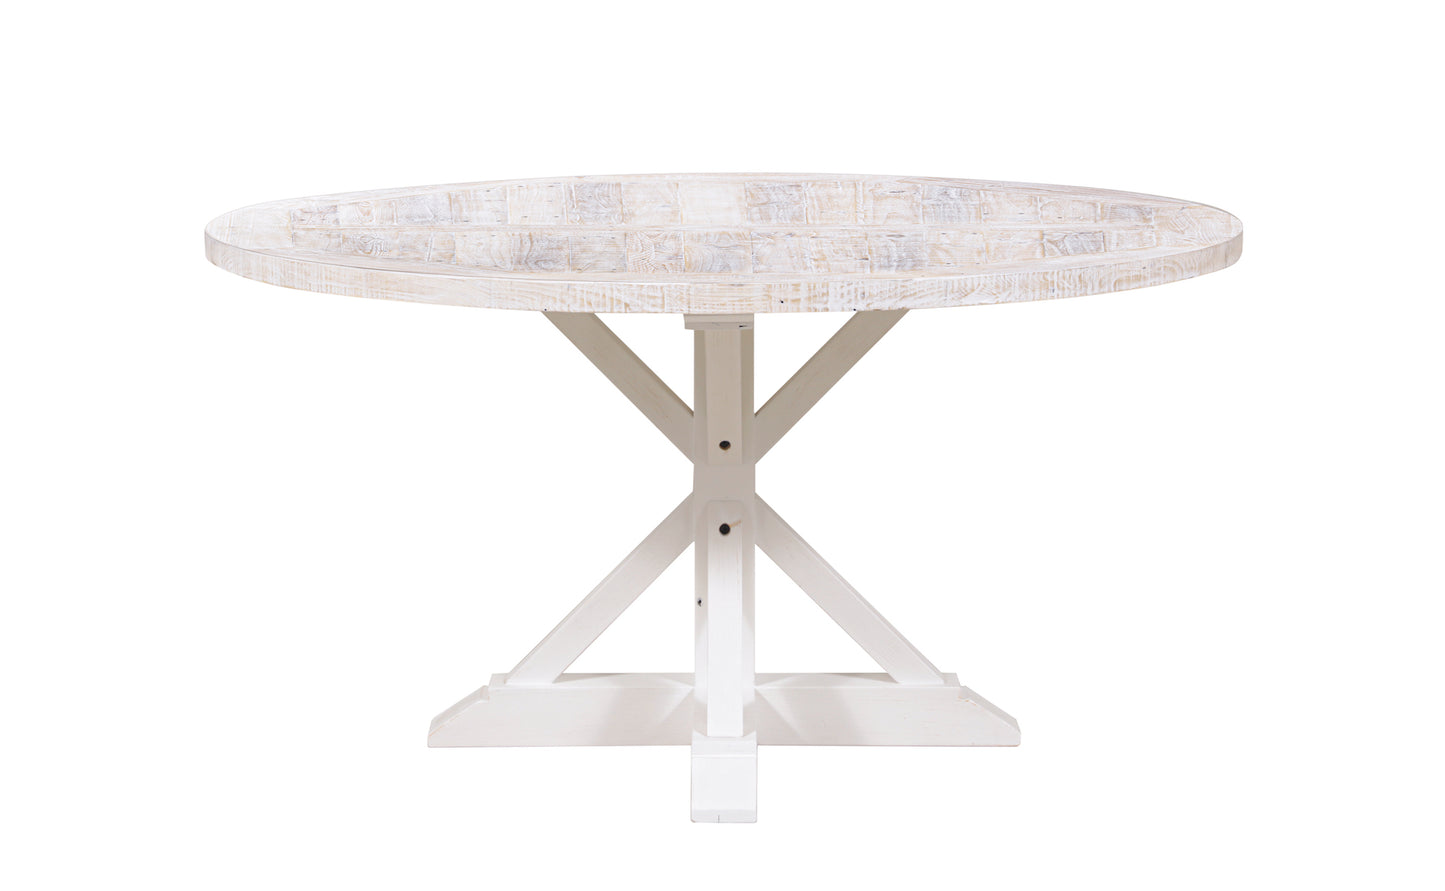 Noosa 1500 Dining Table